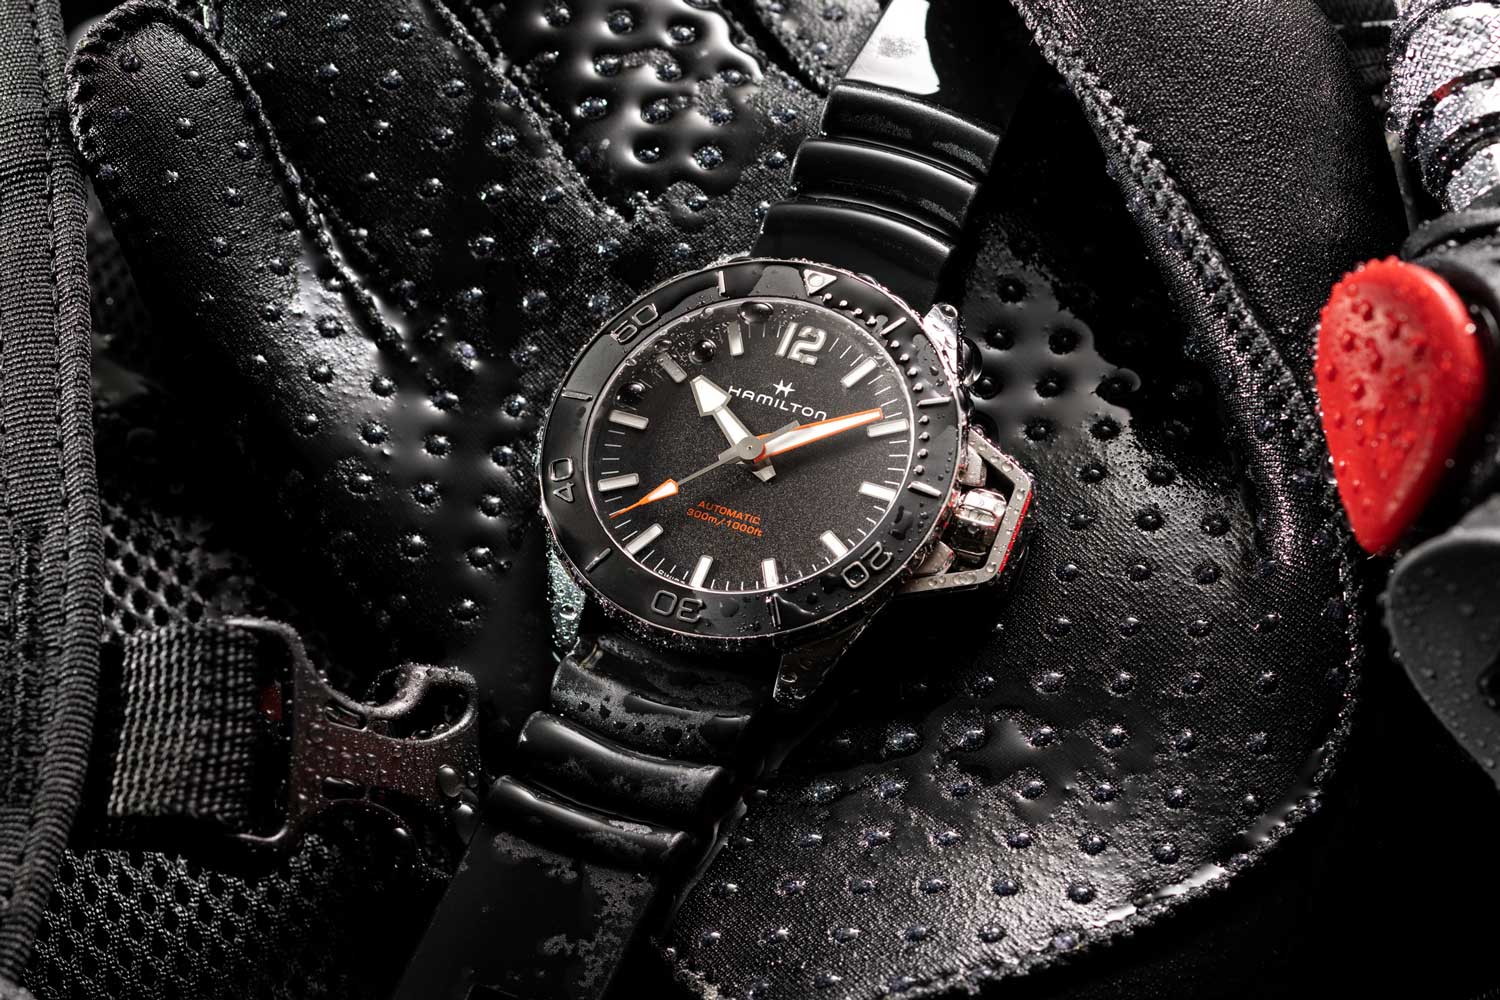 Hamilton Khaki Navy Frogman Automatic in black dial and bezel with white markings, black rubber straps